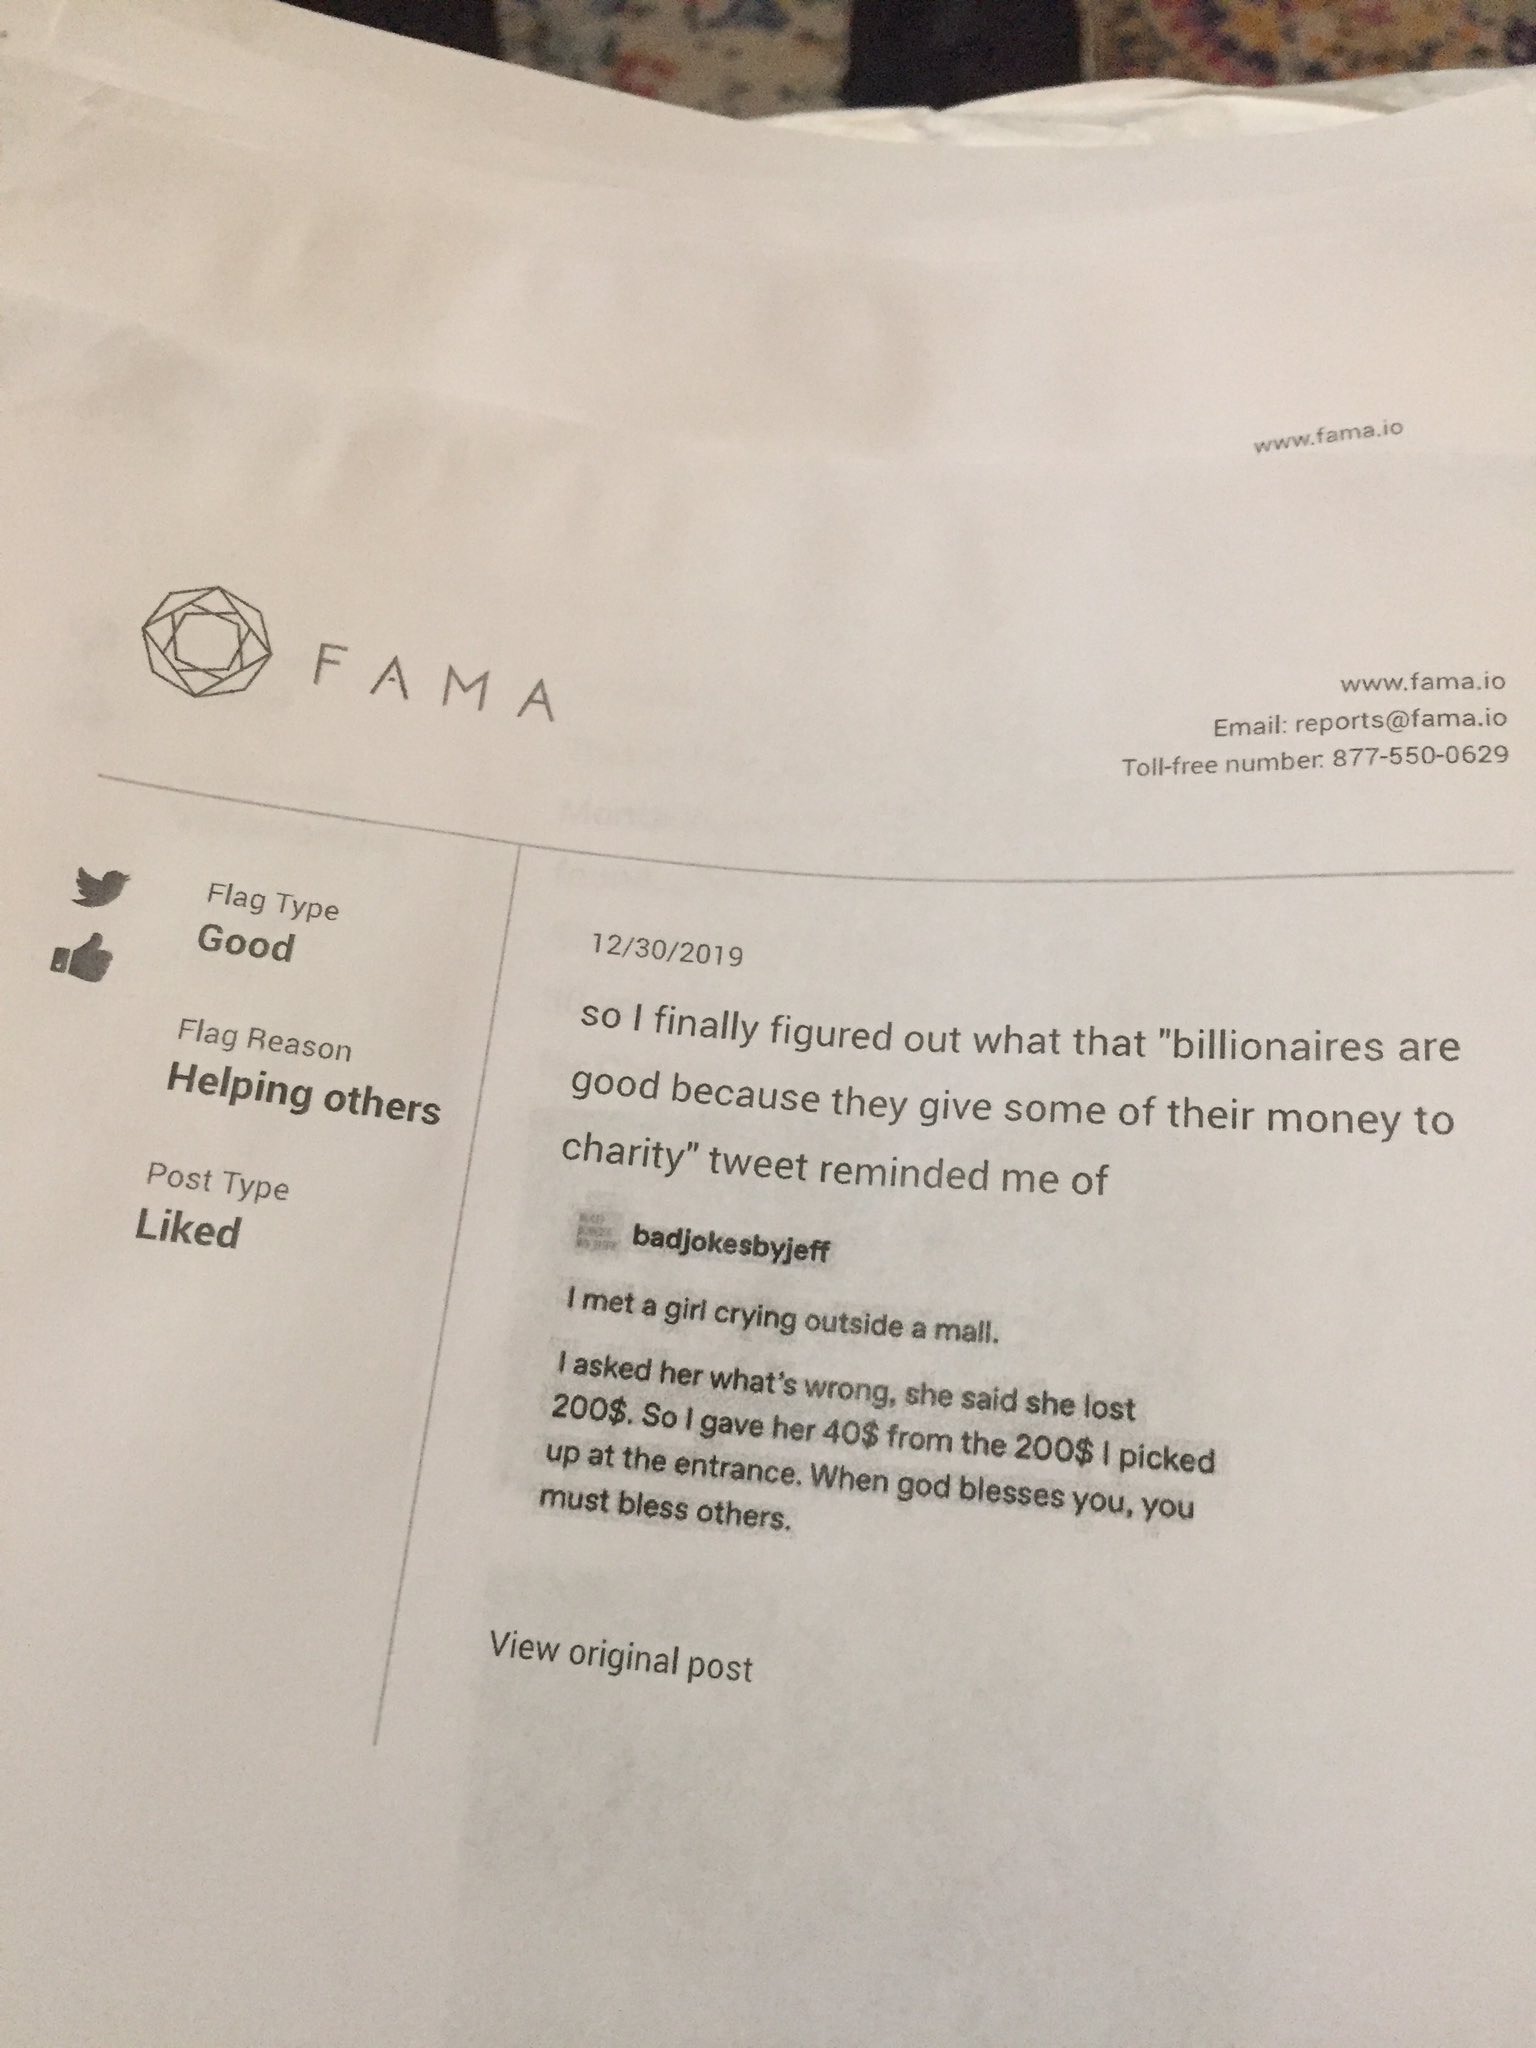 Tweet 4 by user @kmlefranc about his Fama.io social media report